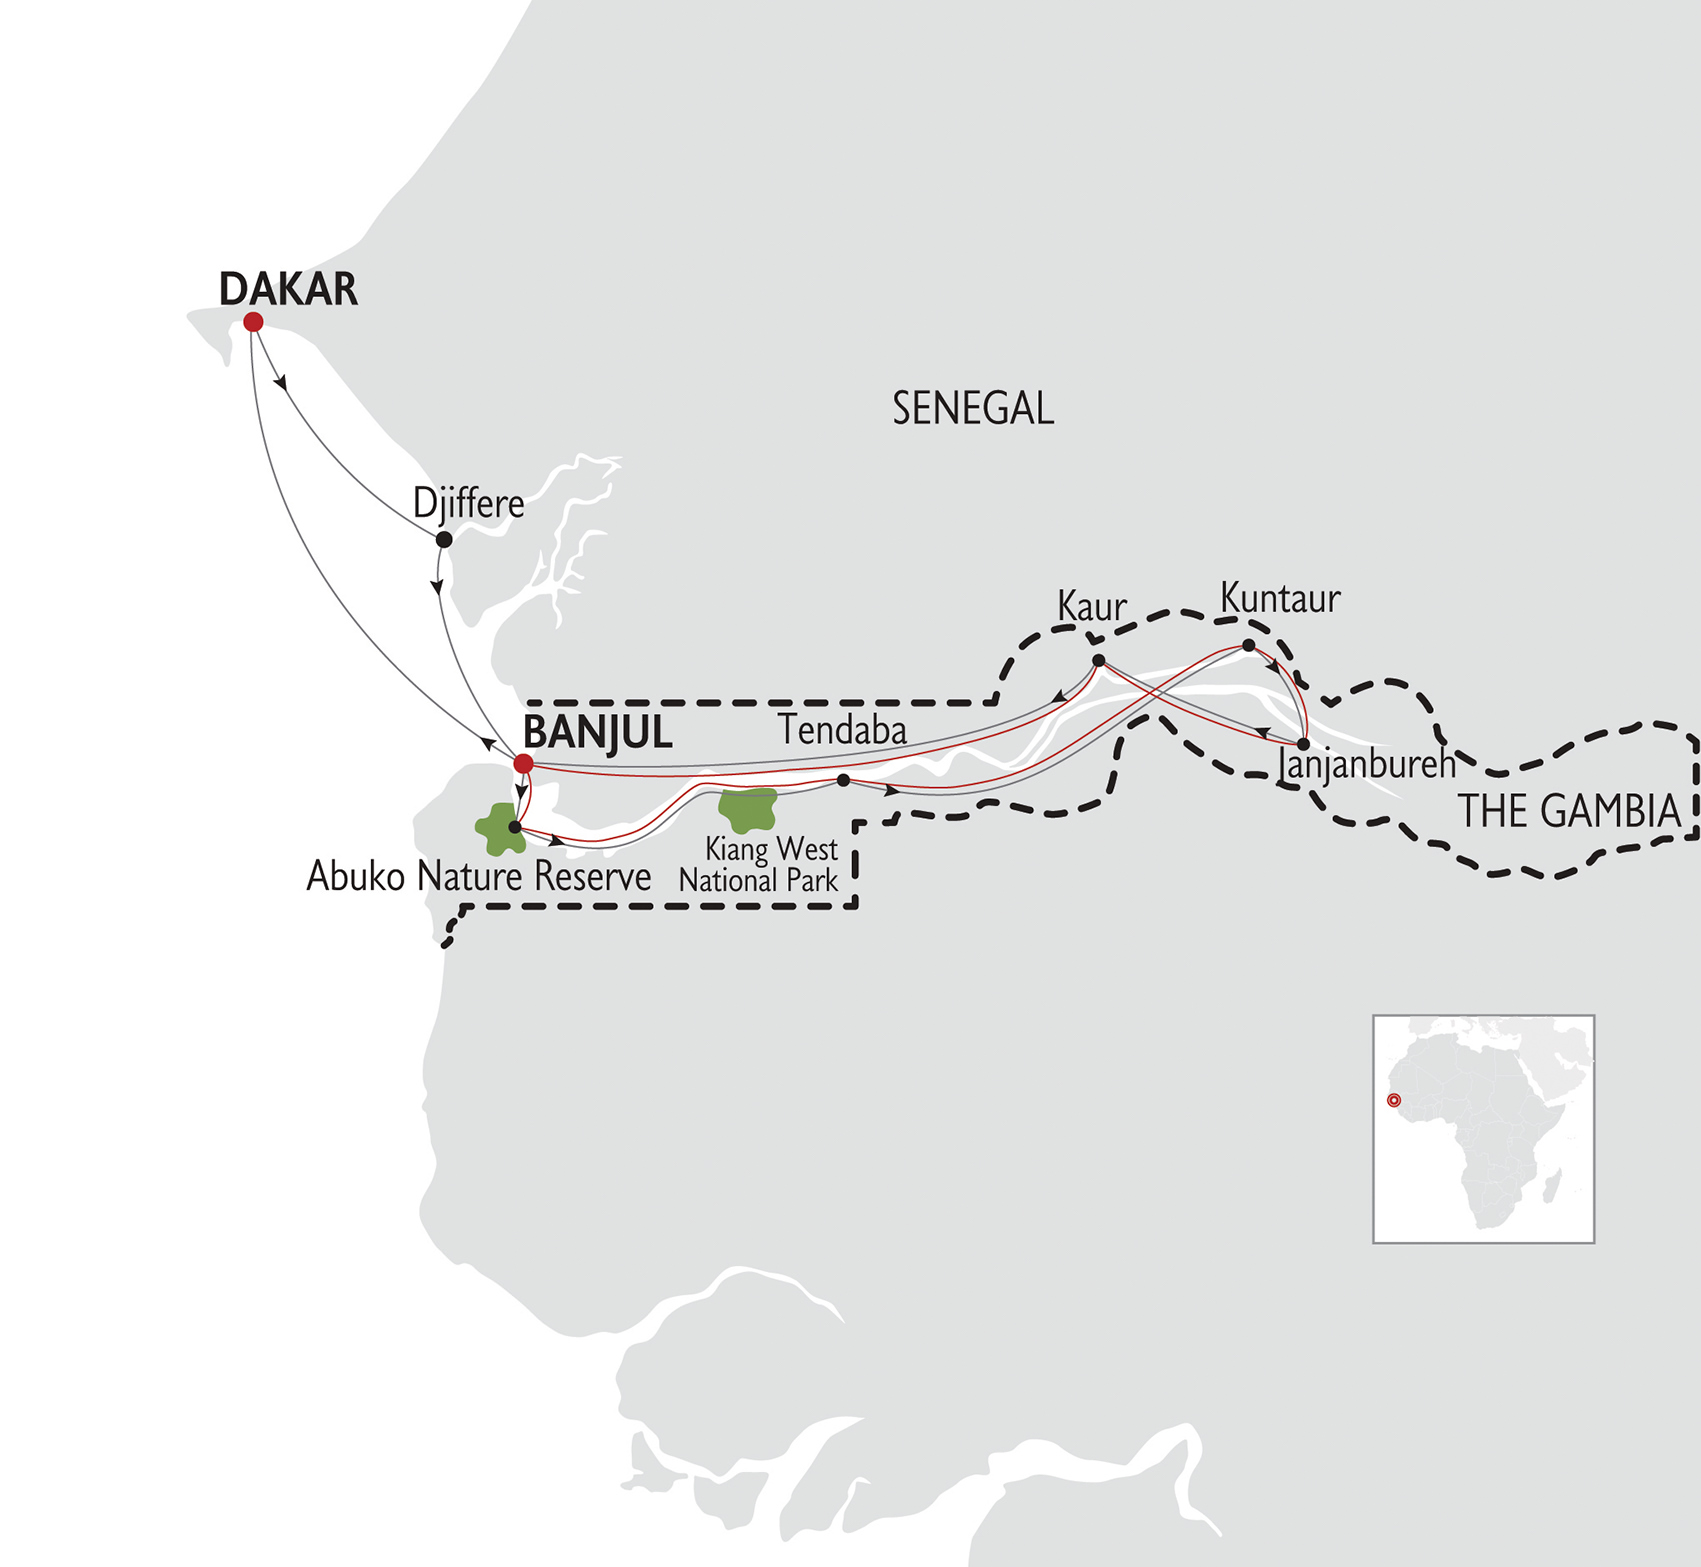 Senegal and Gambia Yacht Cruise Map